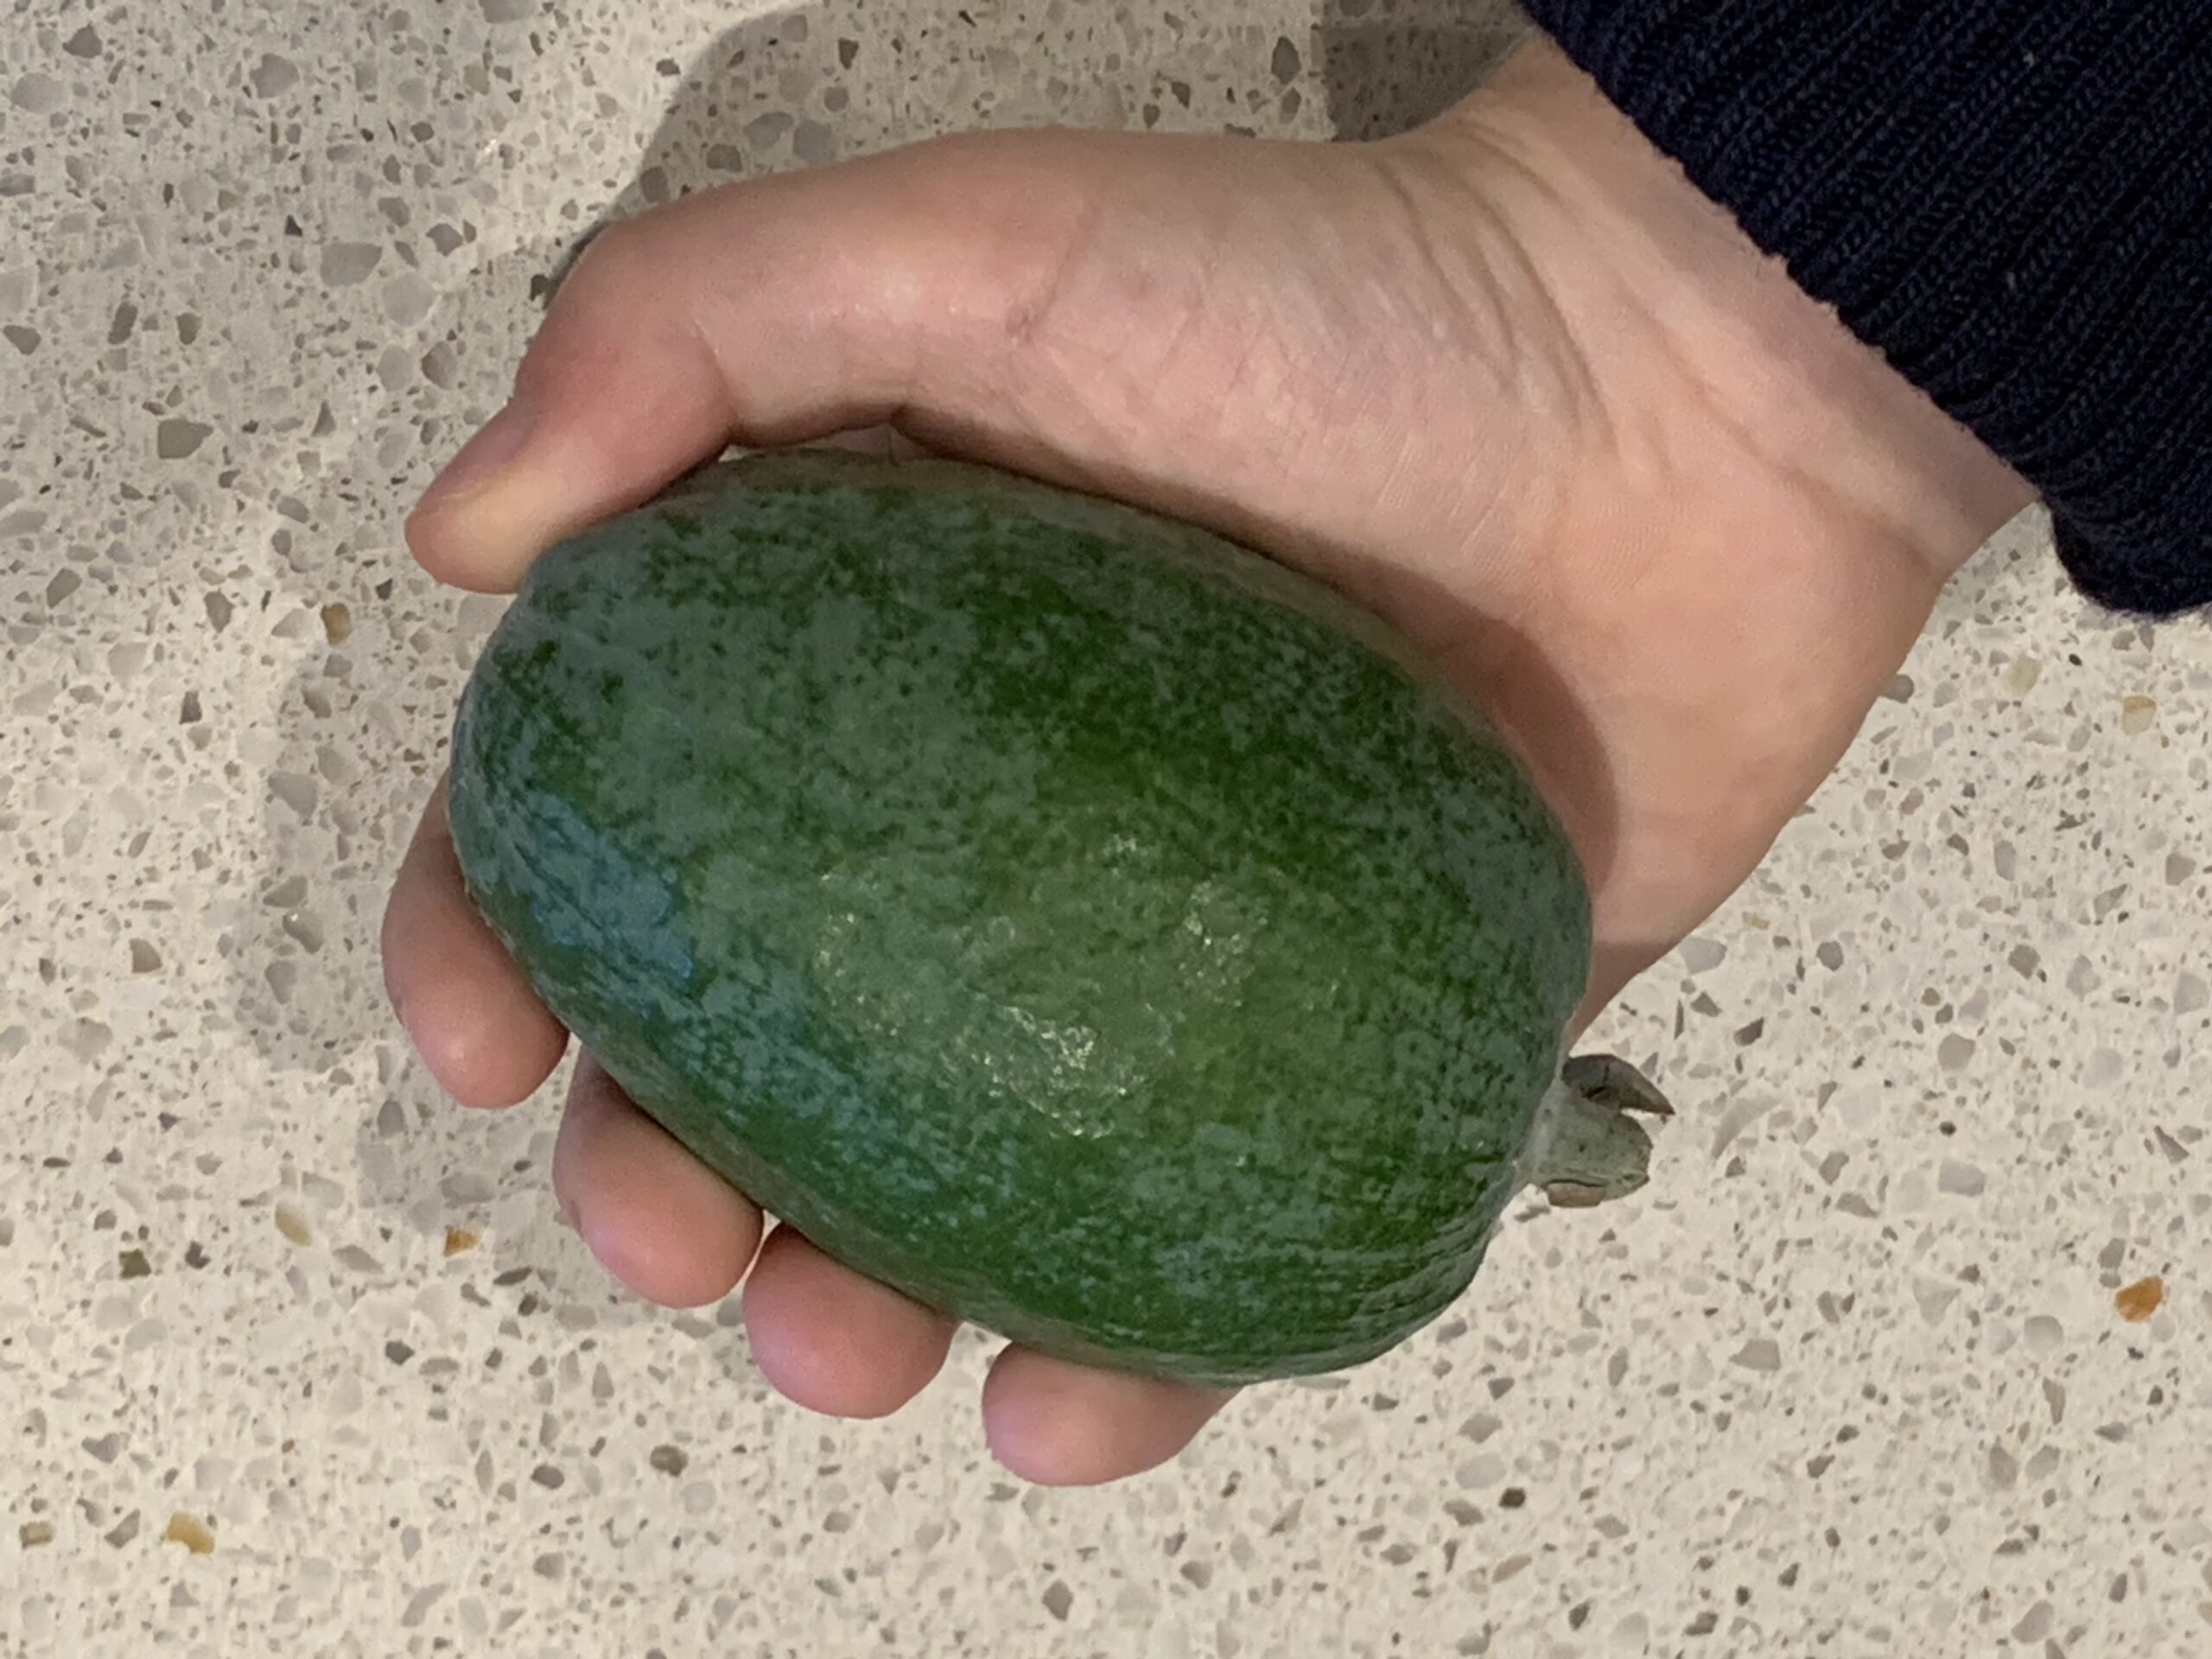 Very large feijoa being held in hand.